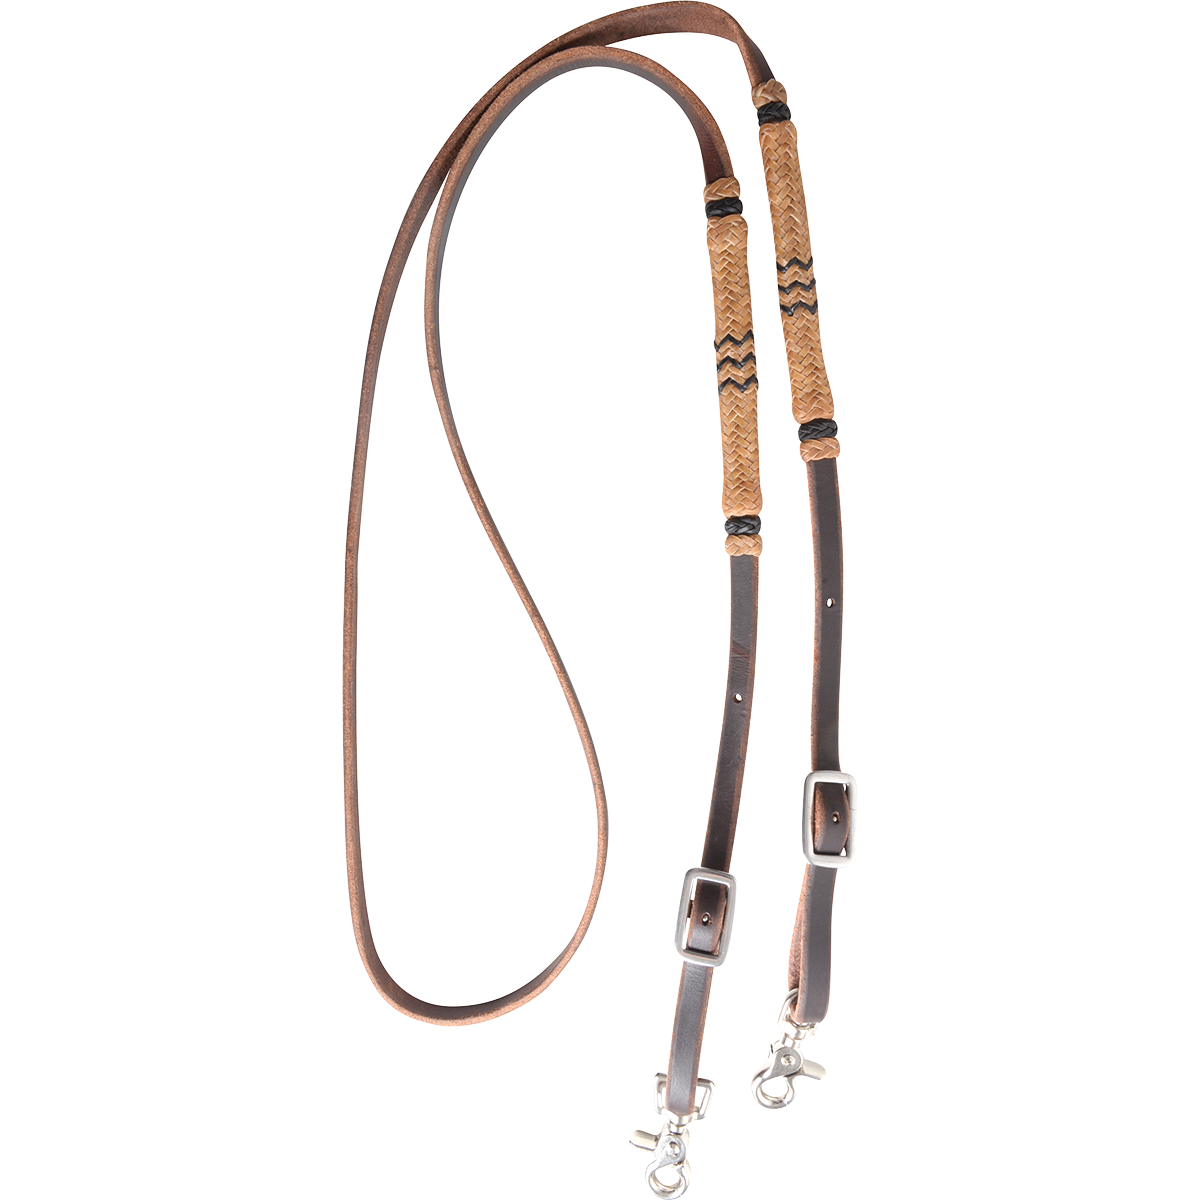 MARTIN 1/2" HARNESS ROPING REIN WITH RAWHIDE KNOTS